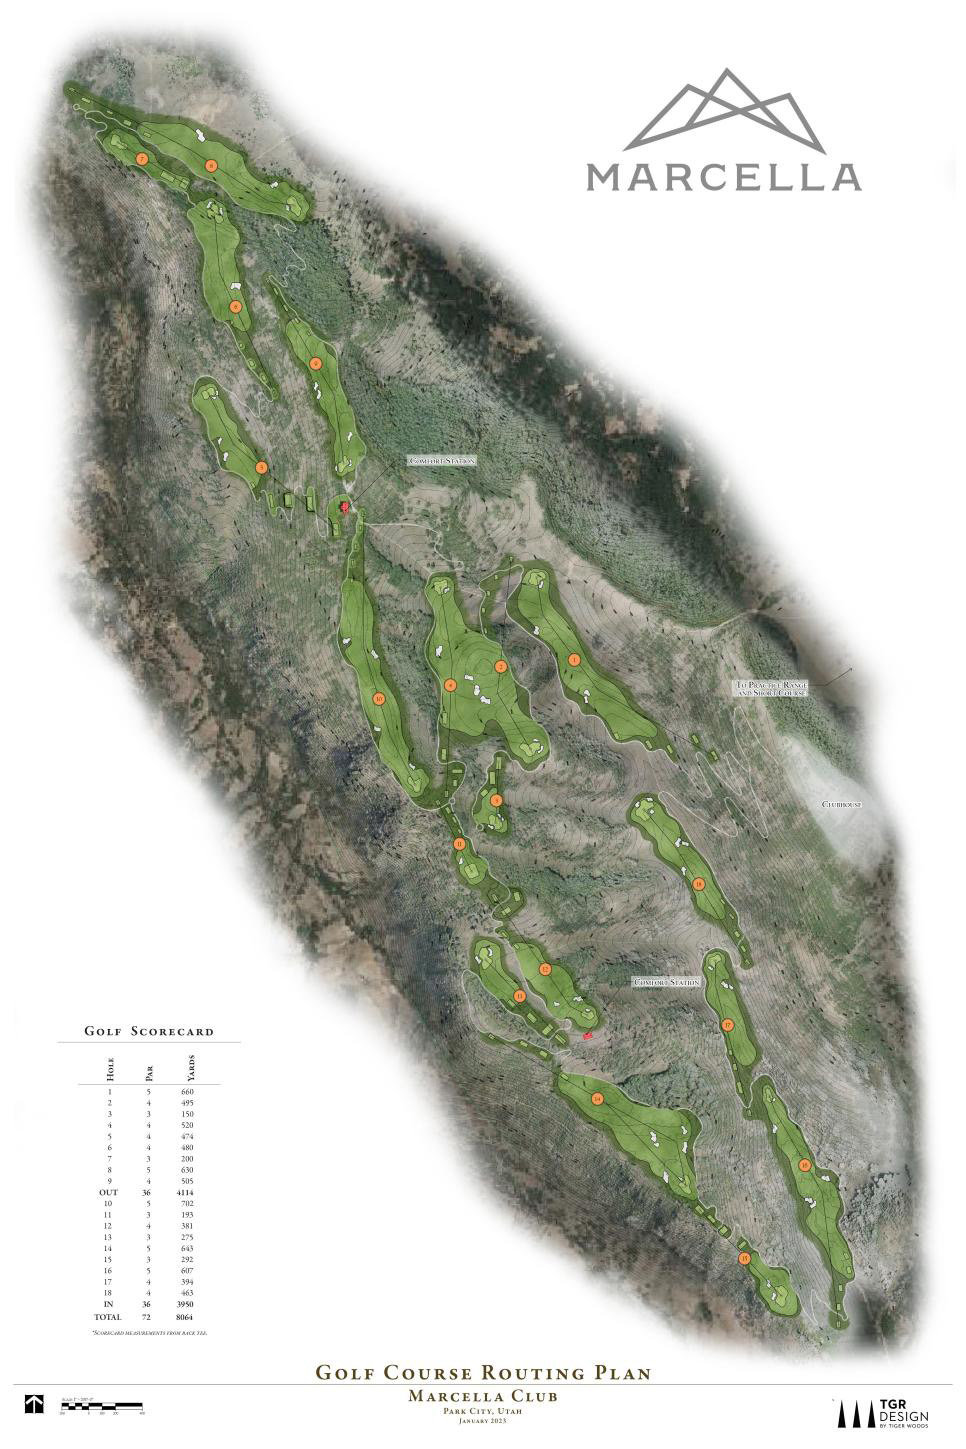 new tiger woods golf course design at marcella